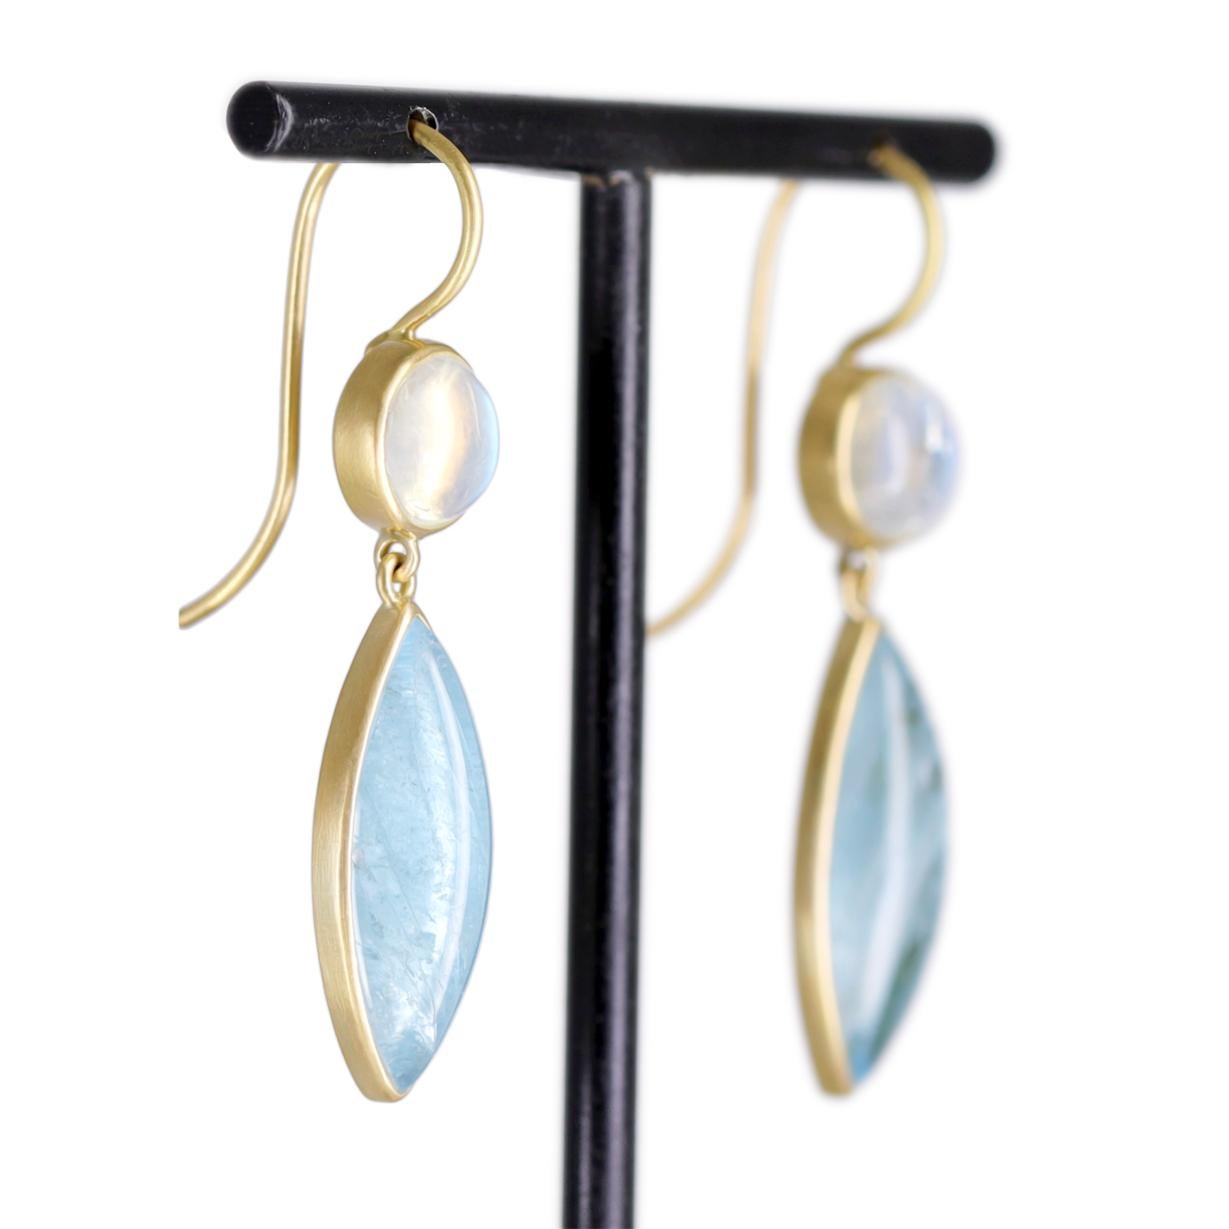 One of a Kind Drop Earrings by award-winning jewelry maker Lola Brooks, hand-fabricated in her signature-finished 18k yellow gold showcasing a gorgeous matched pair of shimmering marquise shaped aquamarine cabochons totaling 32.5 carats, bezel-set